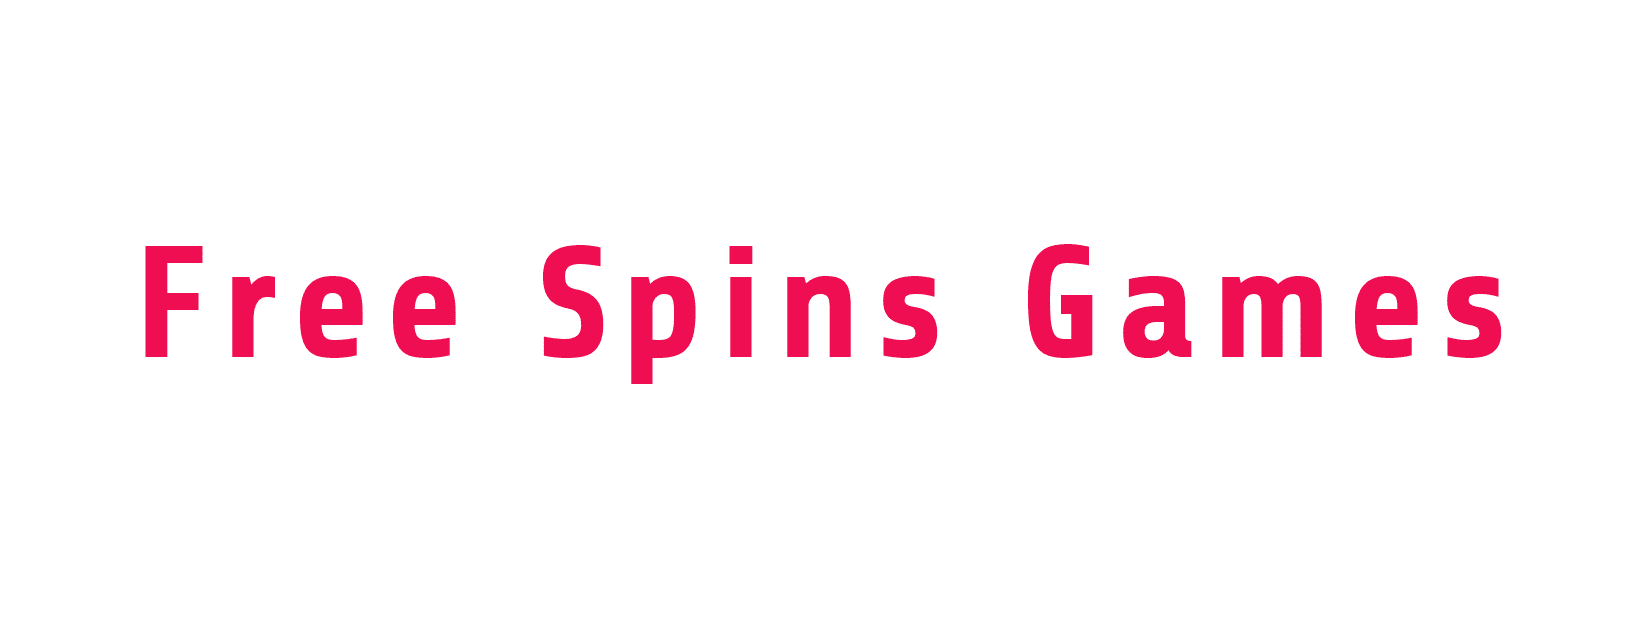 FreeSpinsGames